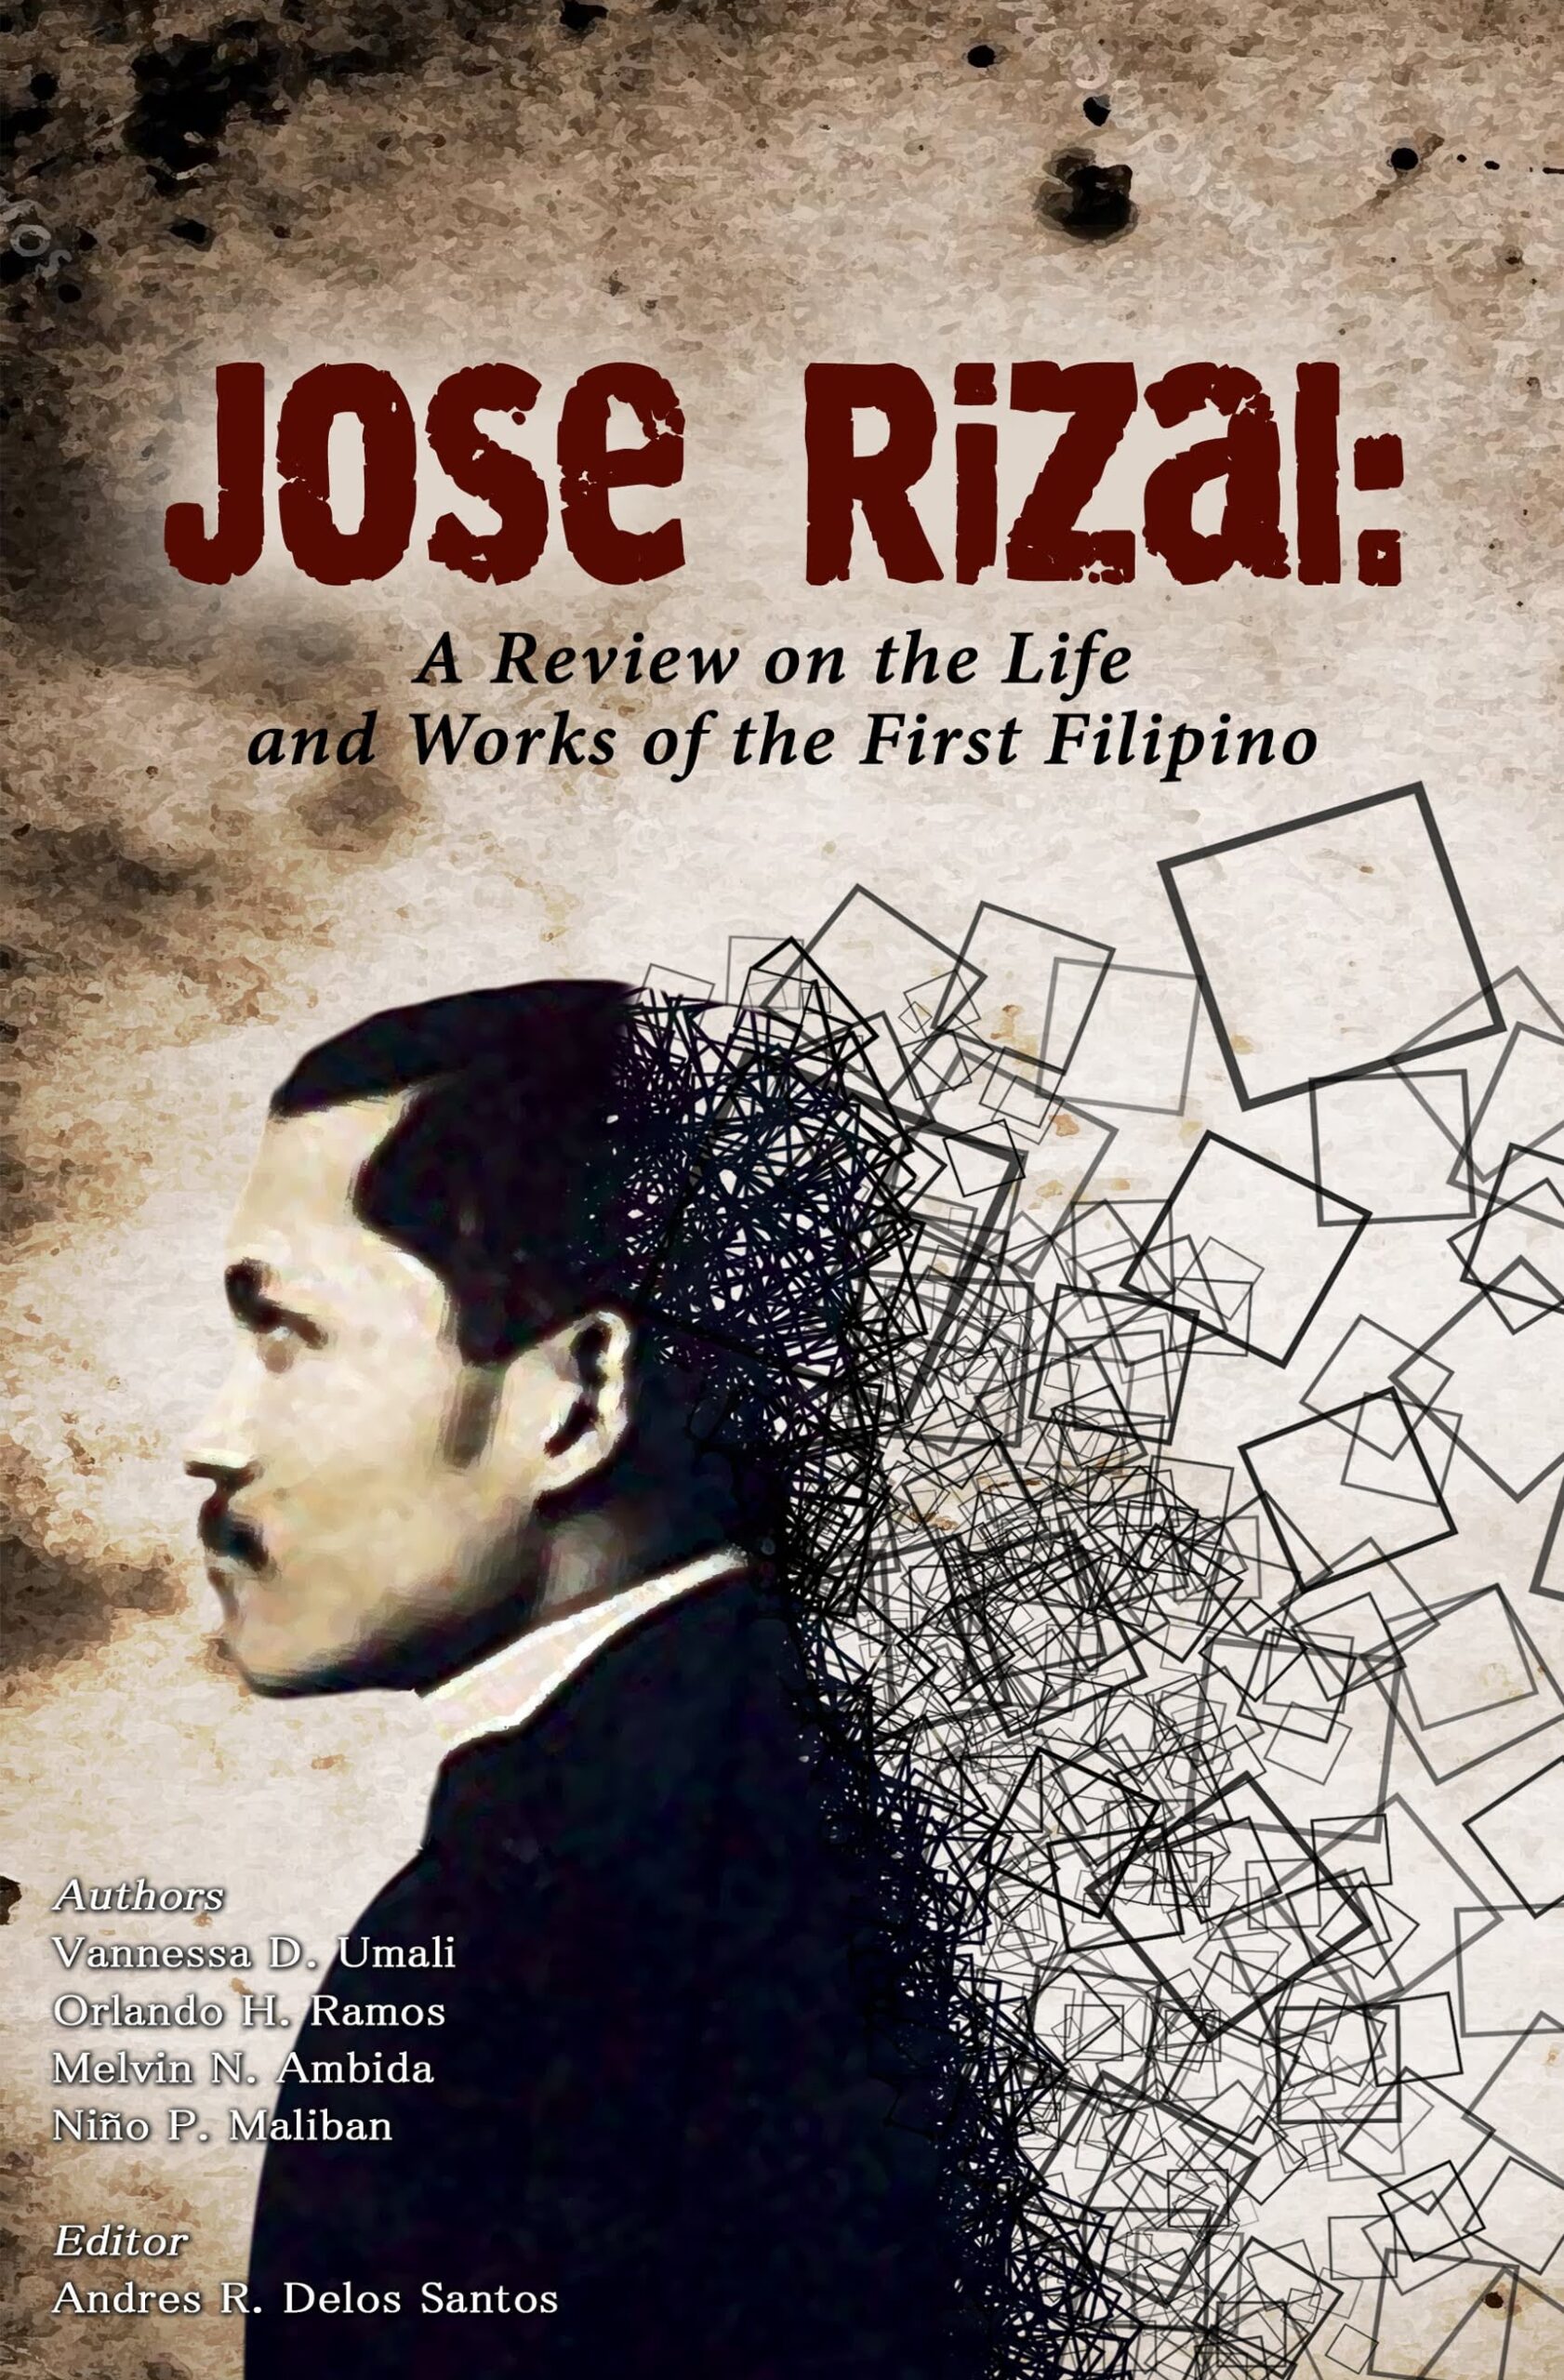 Jose Rizal a review on the life and works of the first Filipino